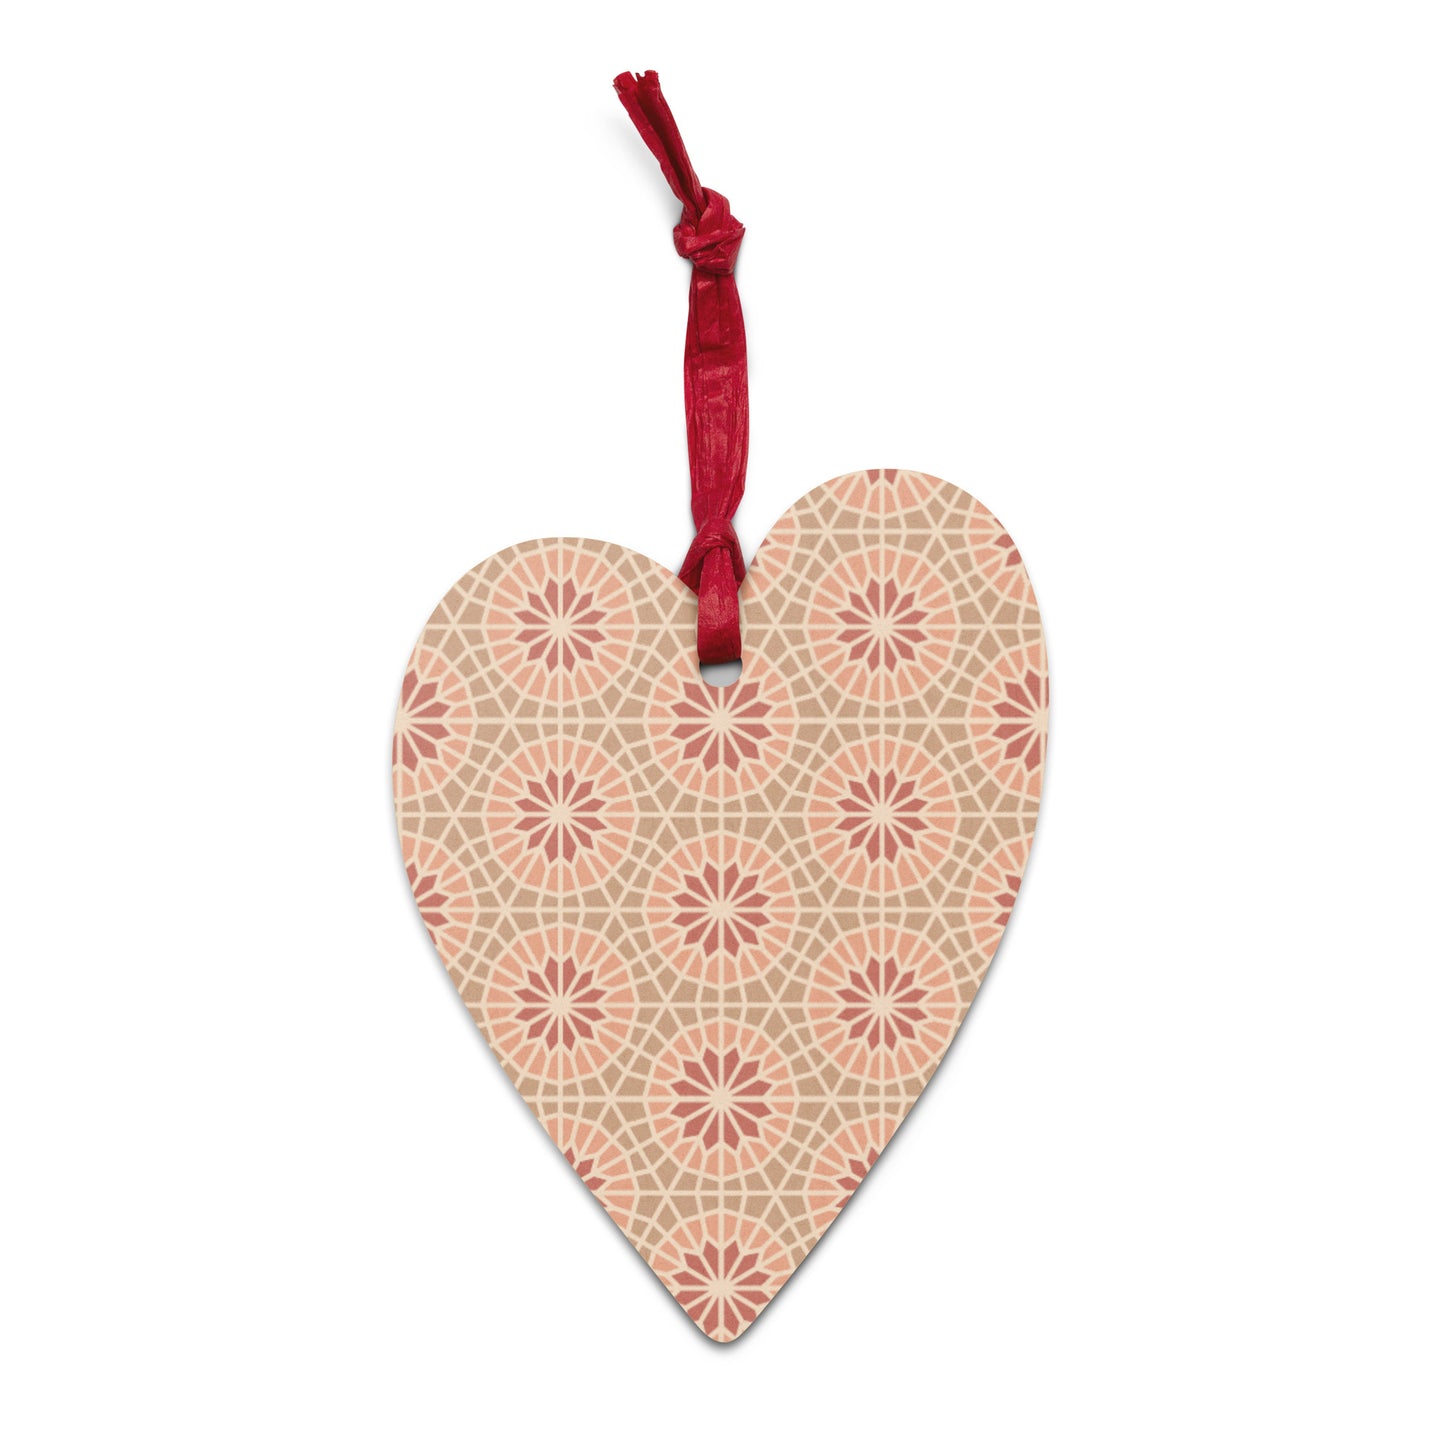 Wooden Holiday Ornaments - Geometric Star in Cocoa and Cream